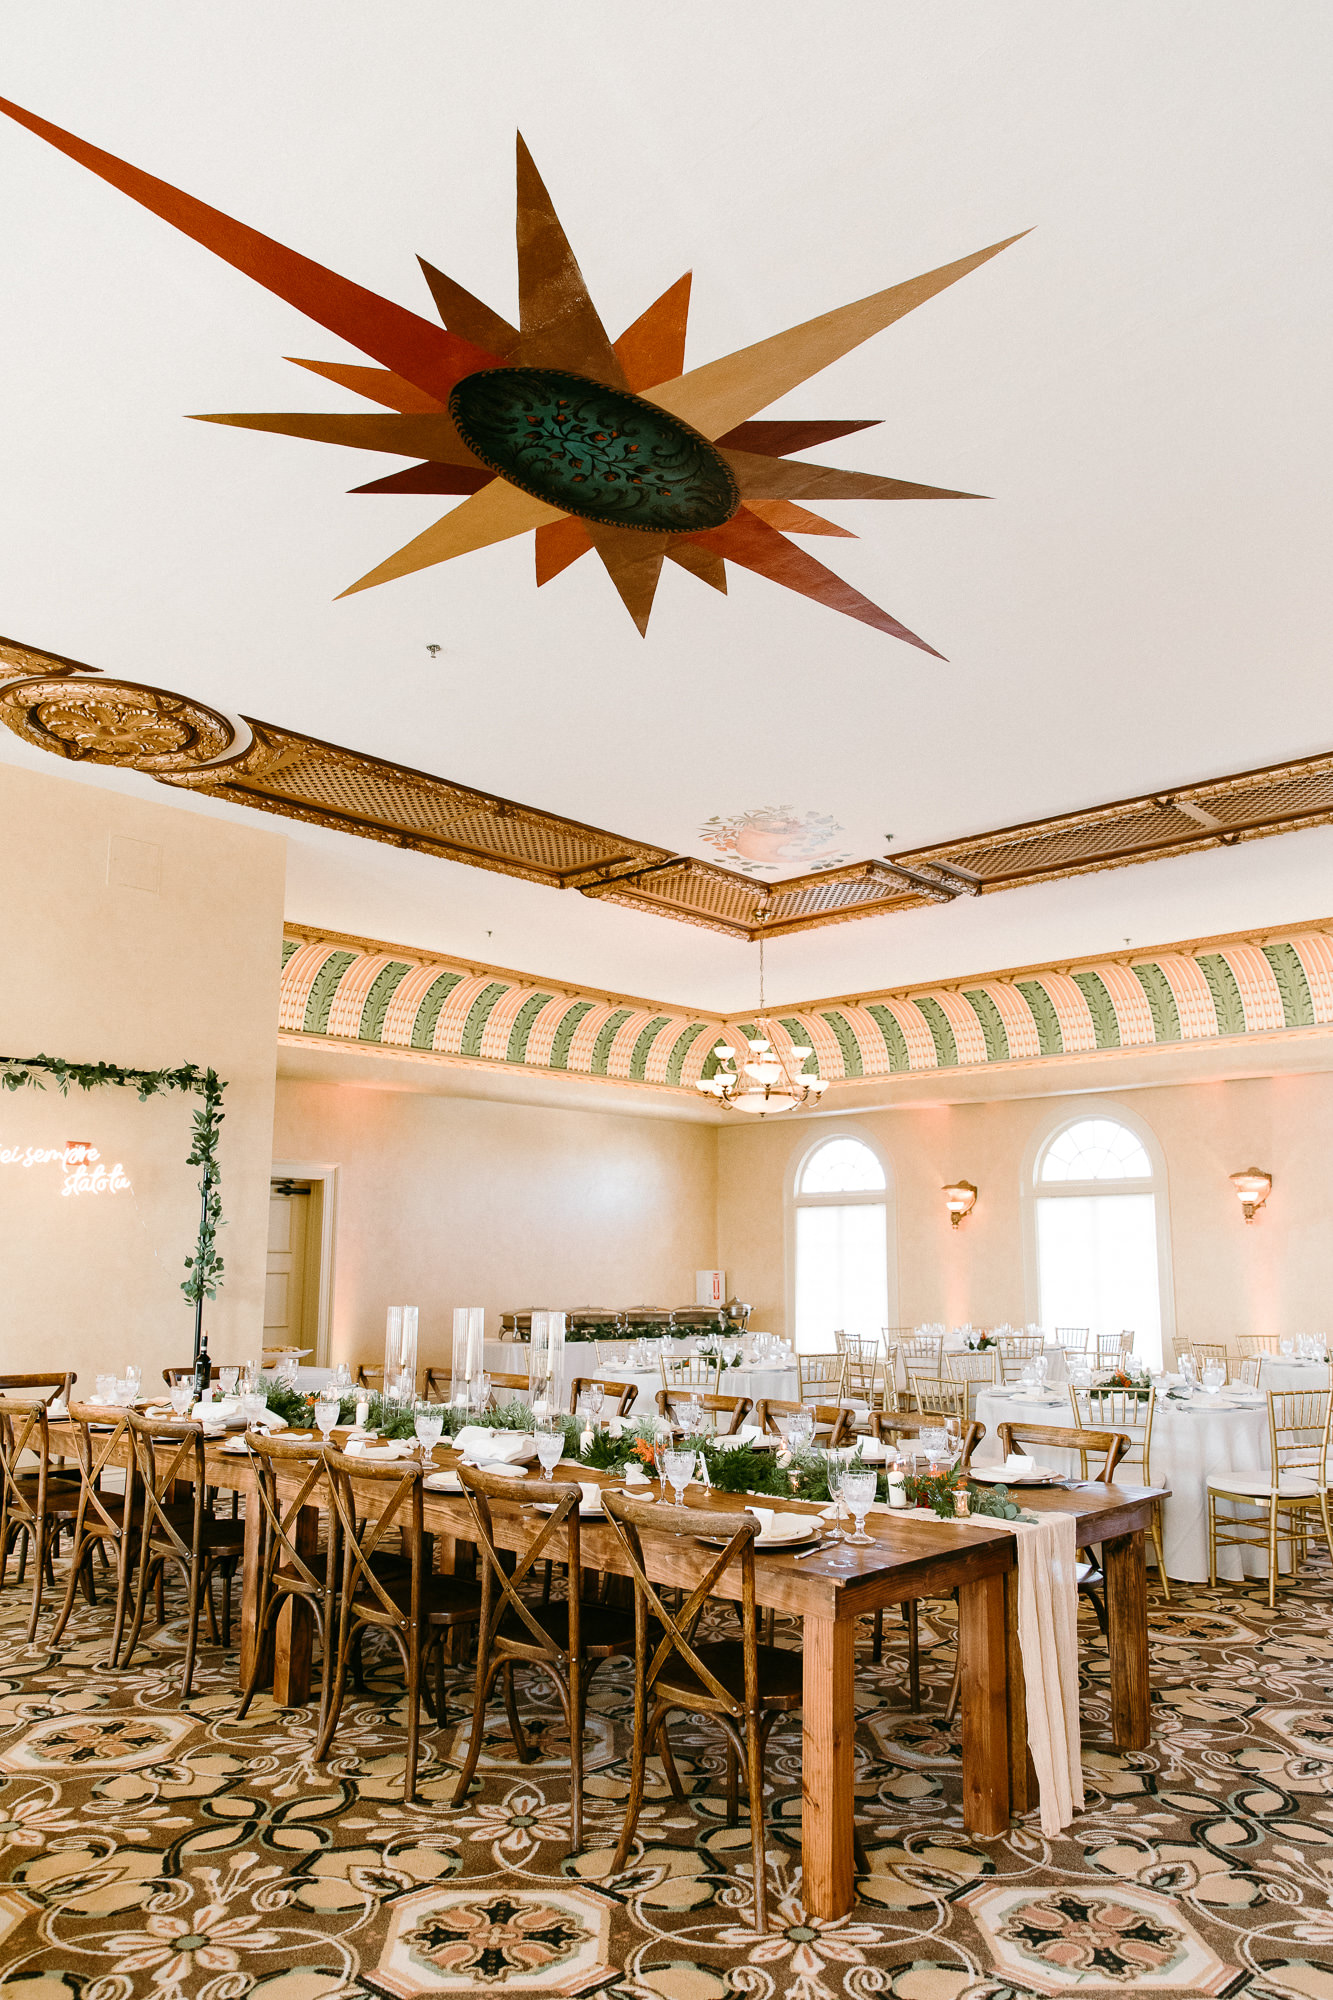 Rustic Italian Elegant Wedding Reception Decor, Ivory Cheesecloth Table Runner, Greenery, Candles, Neon Sign, Rectangular Arch with Greenery, Long Wooden Feasting Table | Tampa Bay Wedding Rentals Outside the Box Rentals | Venue The Italian Club